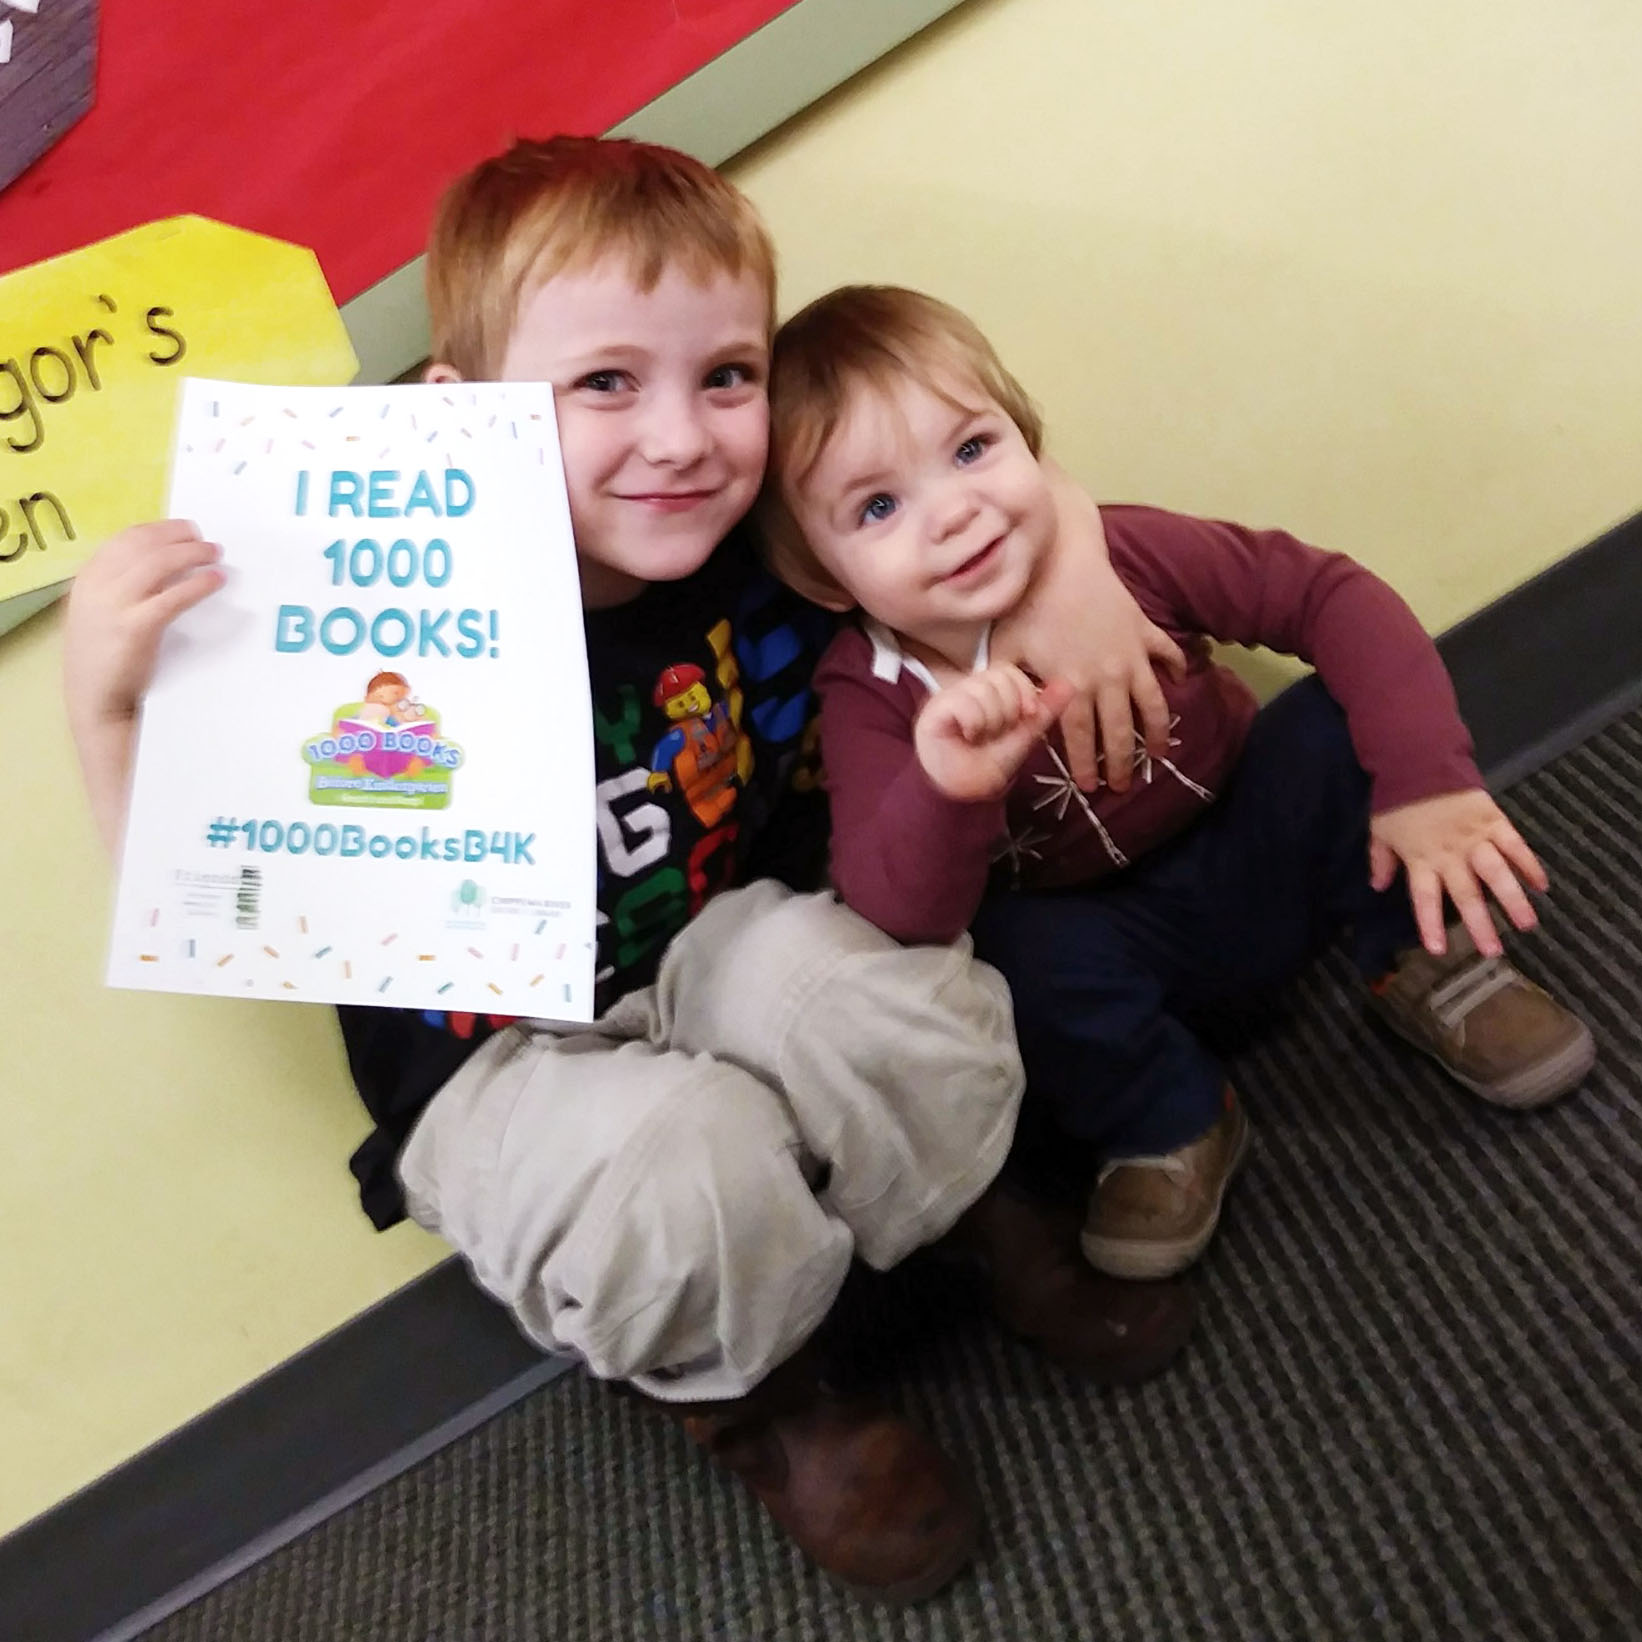 Two young boys holding "I read 1000 books sign."